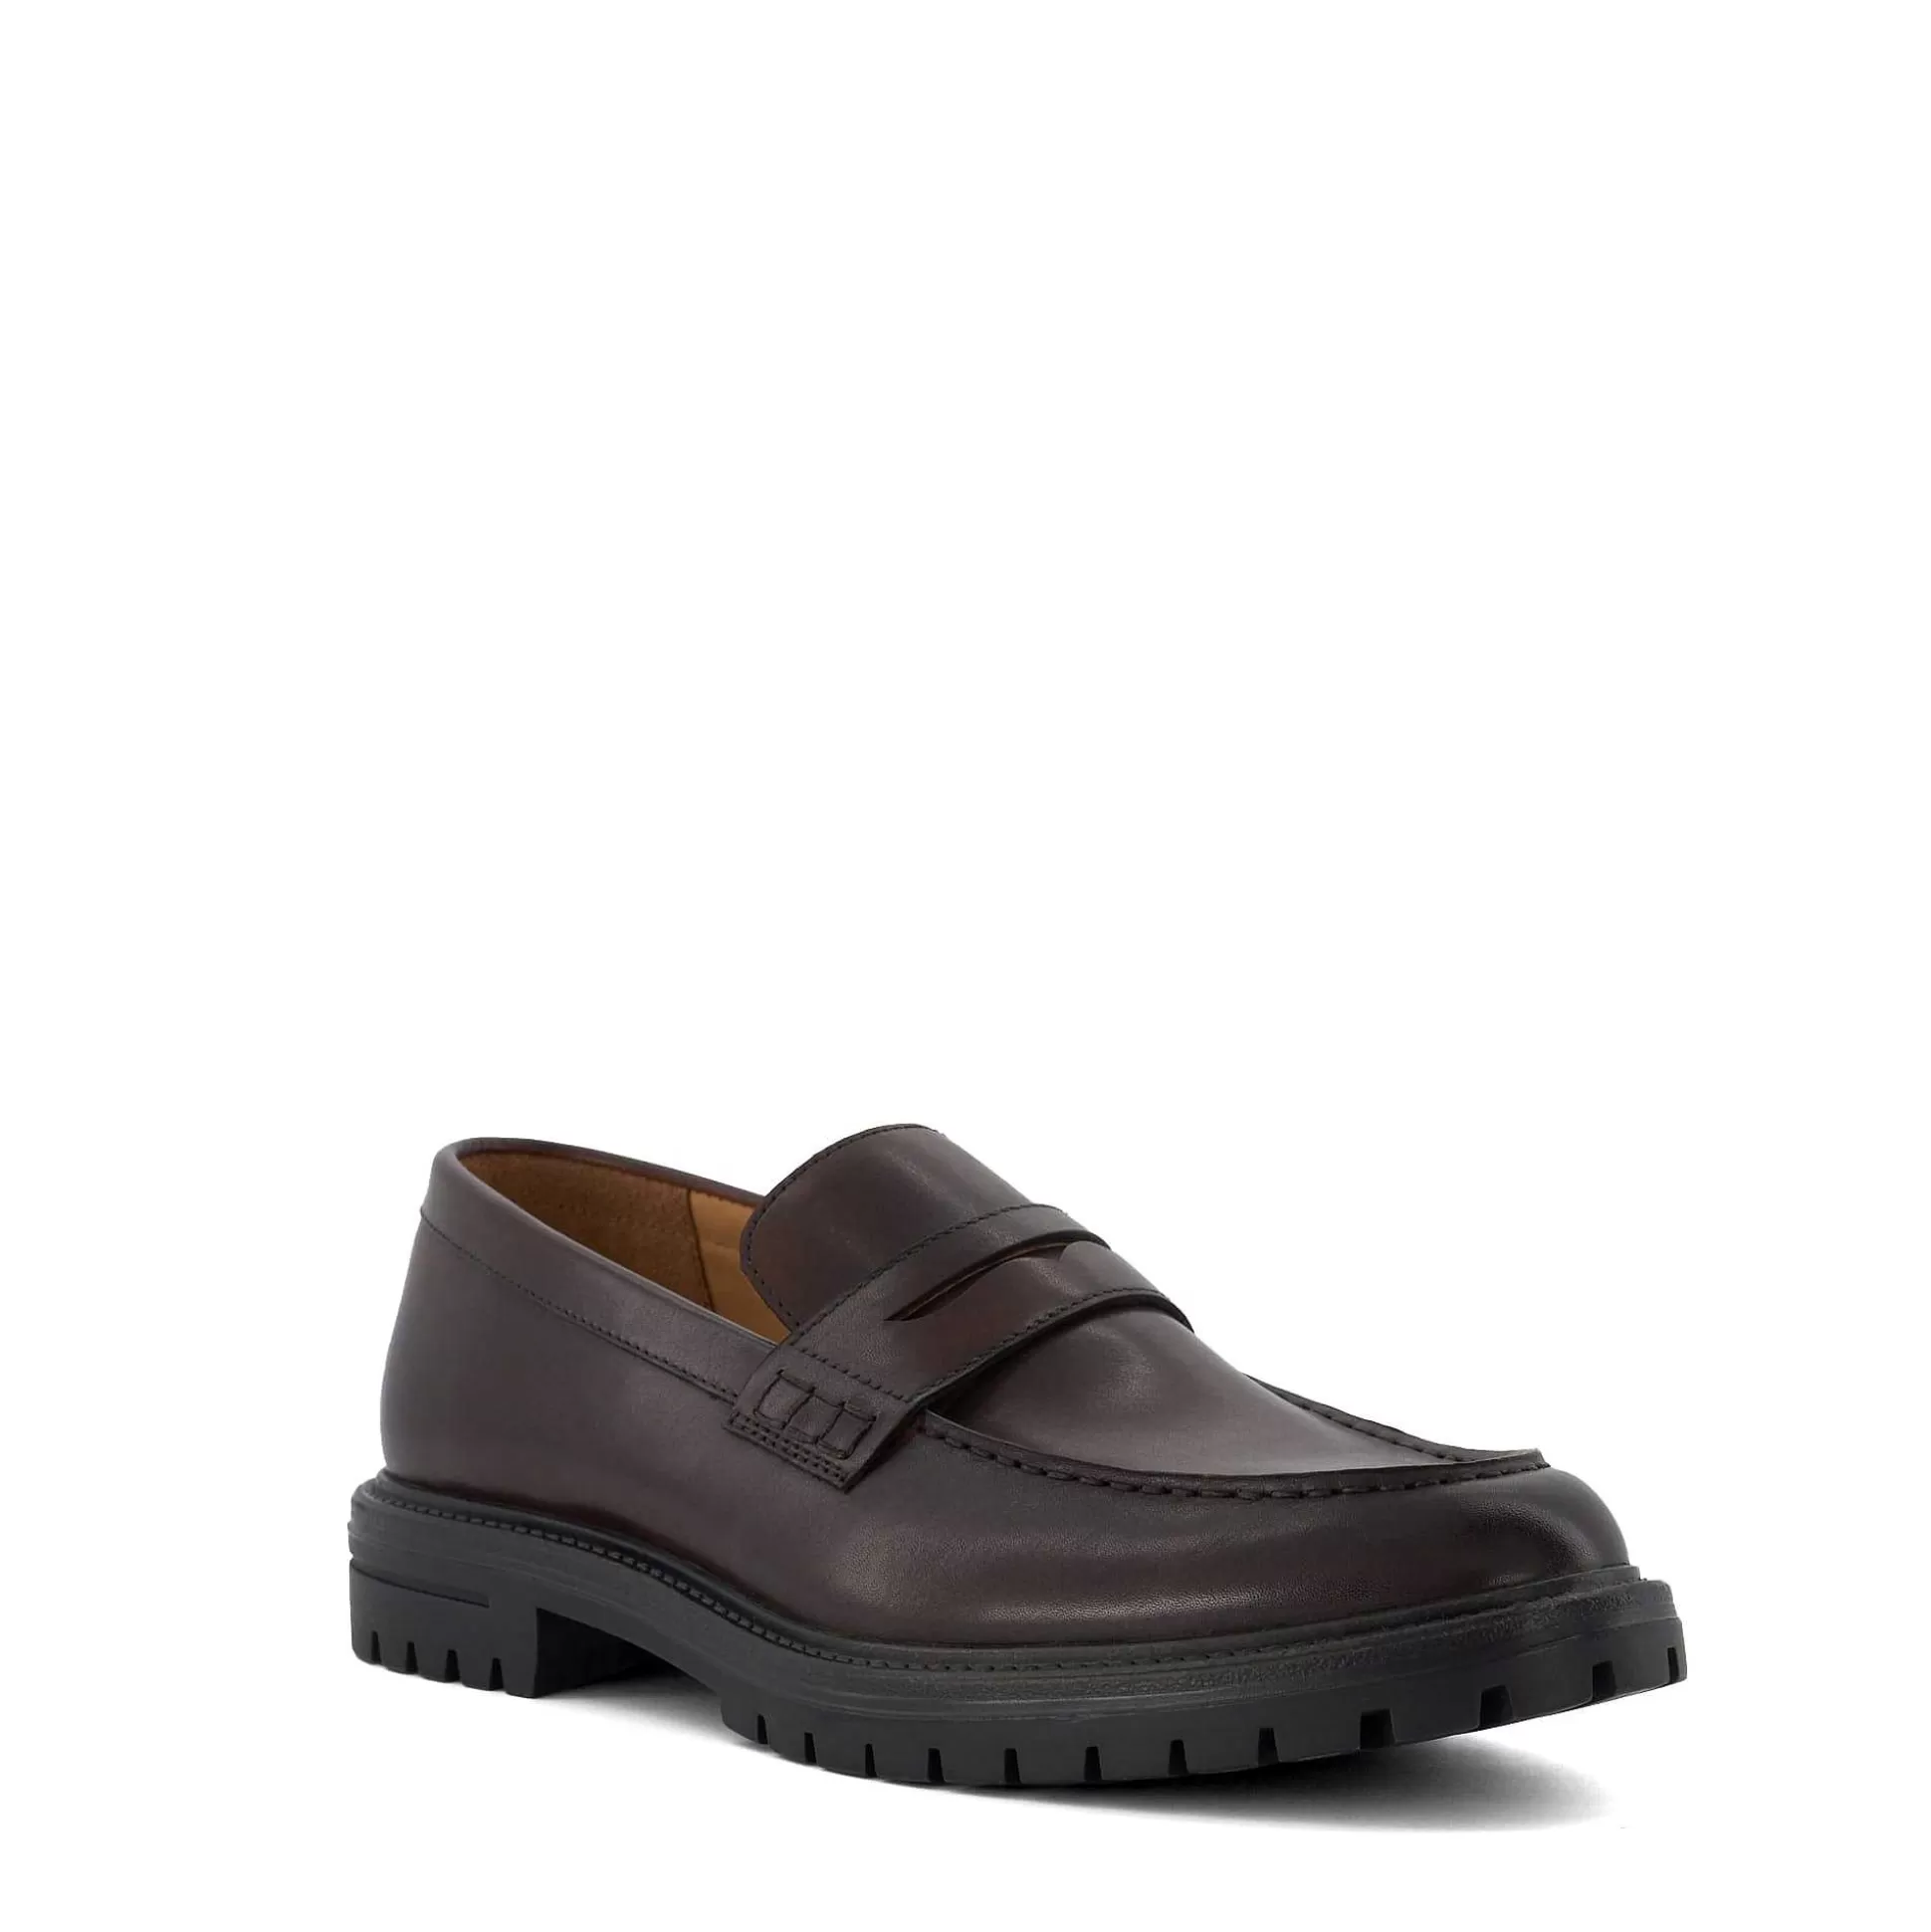 Dune London BANKING - DARK BROWN-Men Casual Shoes | Loafers